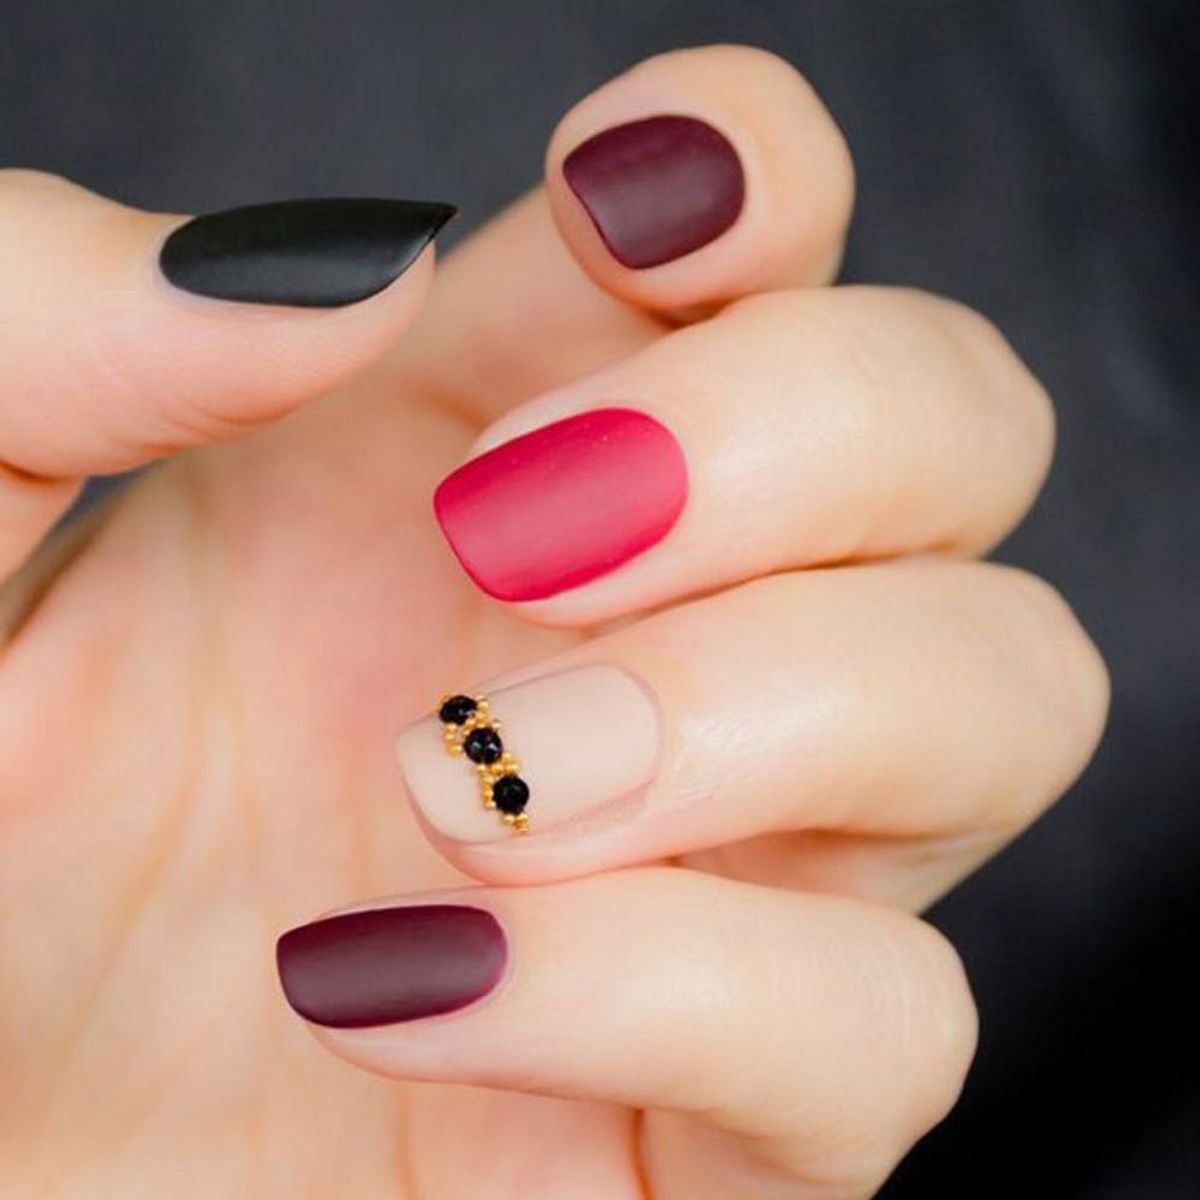 14 Unexpected Manis to Rock This Holiday Season